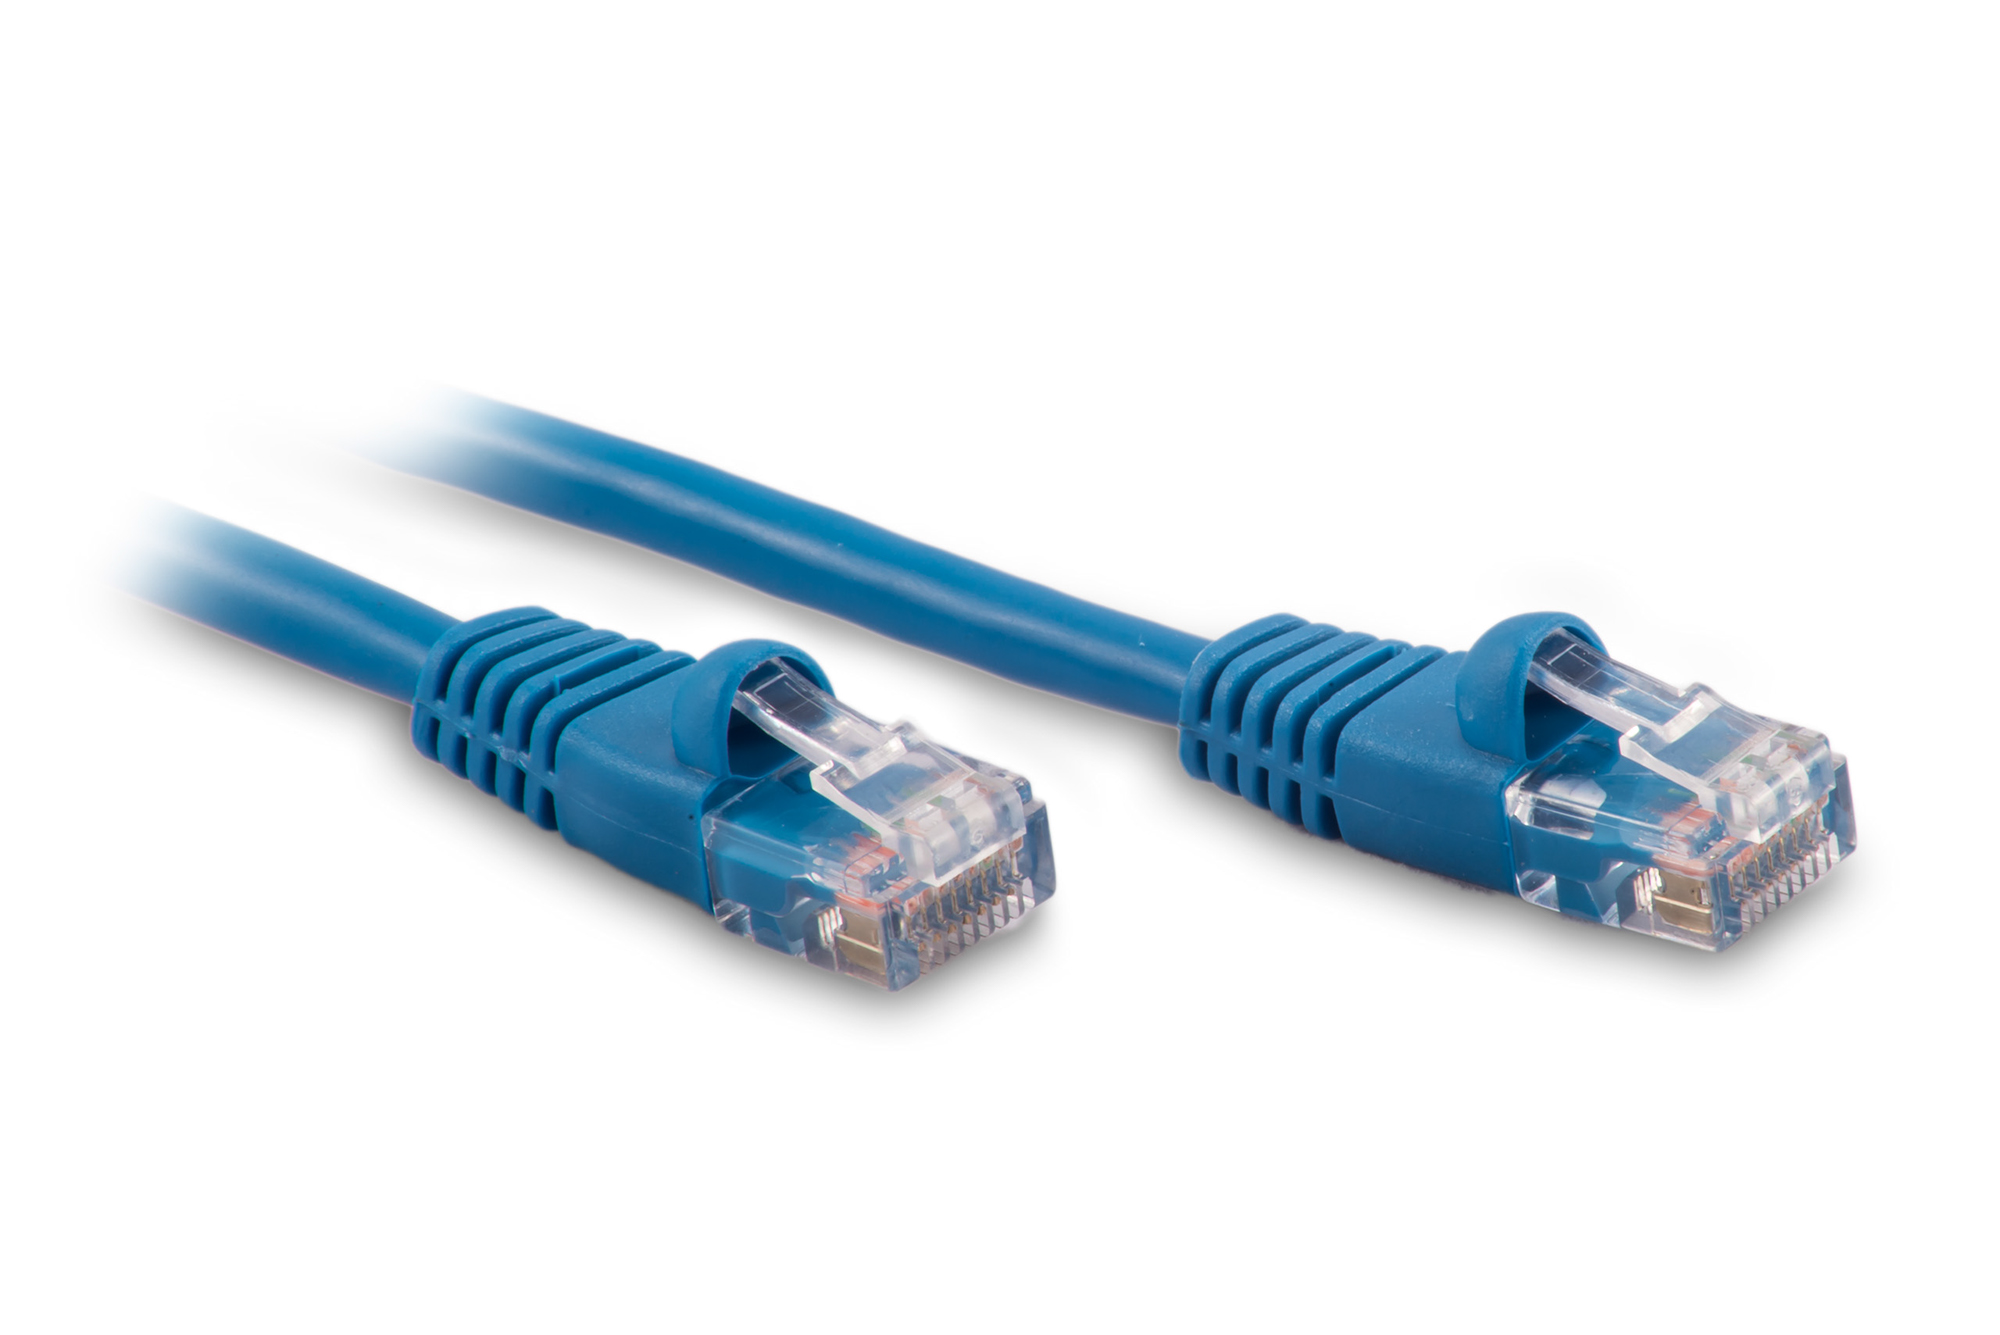 50ft Cat6 Ethernet Patch Cable - Blue Color - Snagless Boot, Stranded, RJ45, 550Mhz, 24AWG